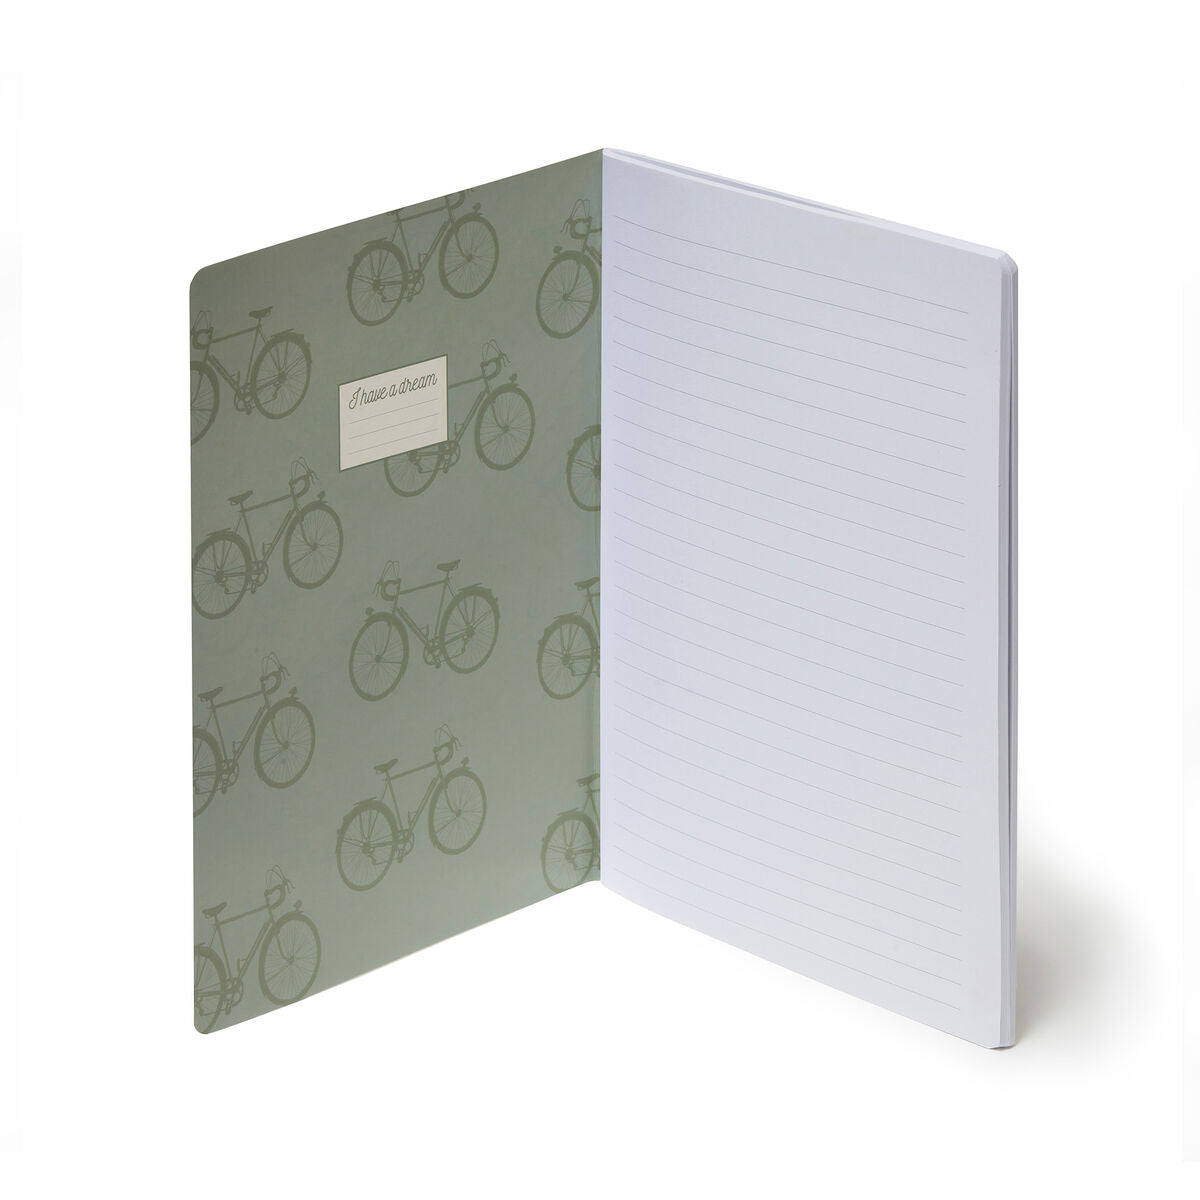 Legami A5 Notebook | Bike | Open | Gift Ideas For Her | Gifting Made Simple